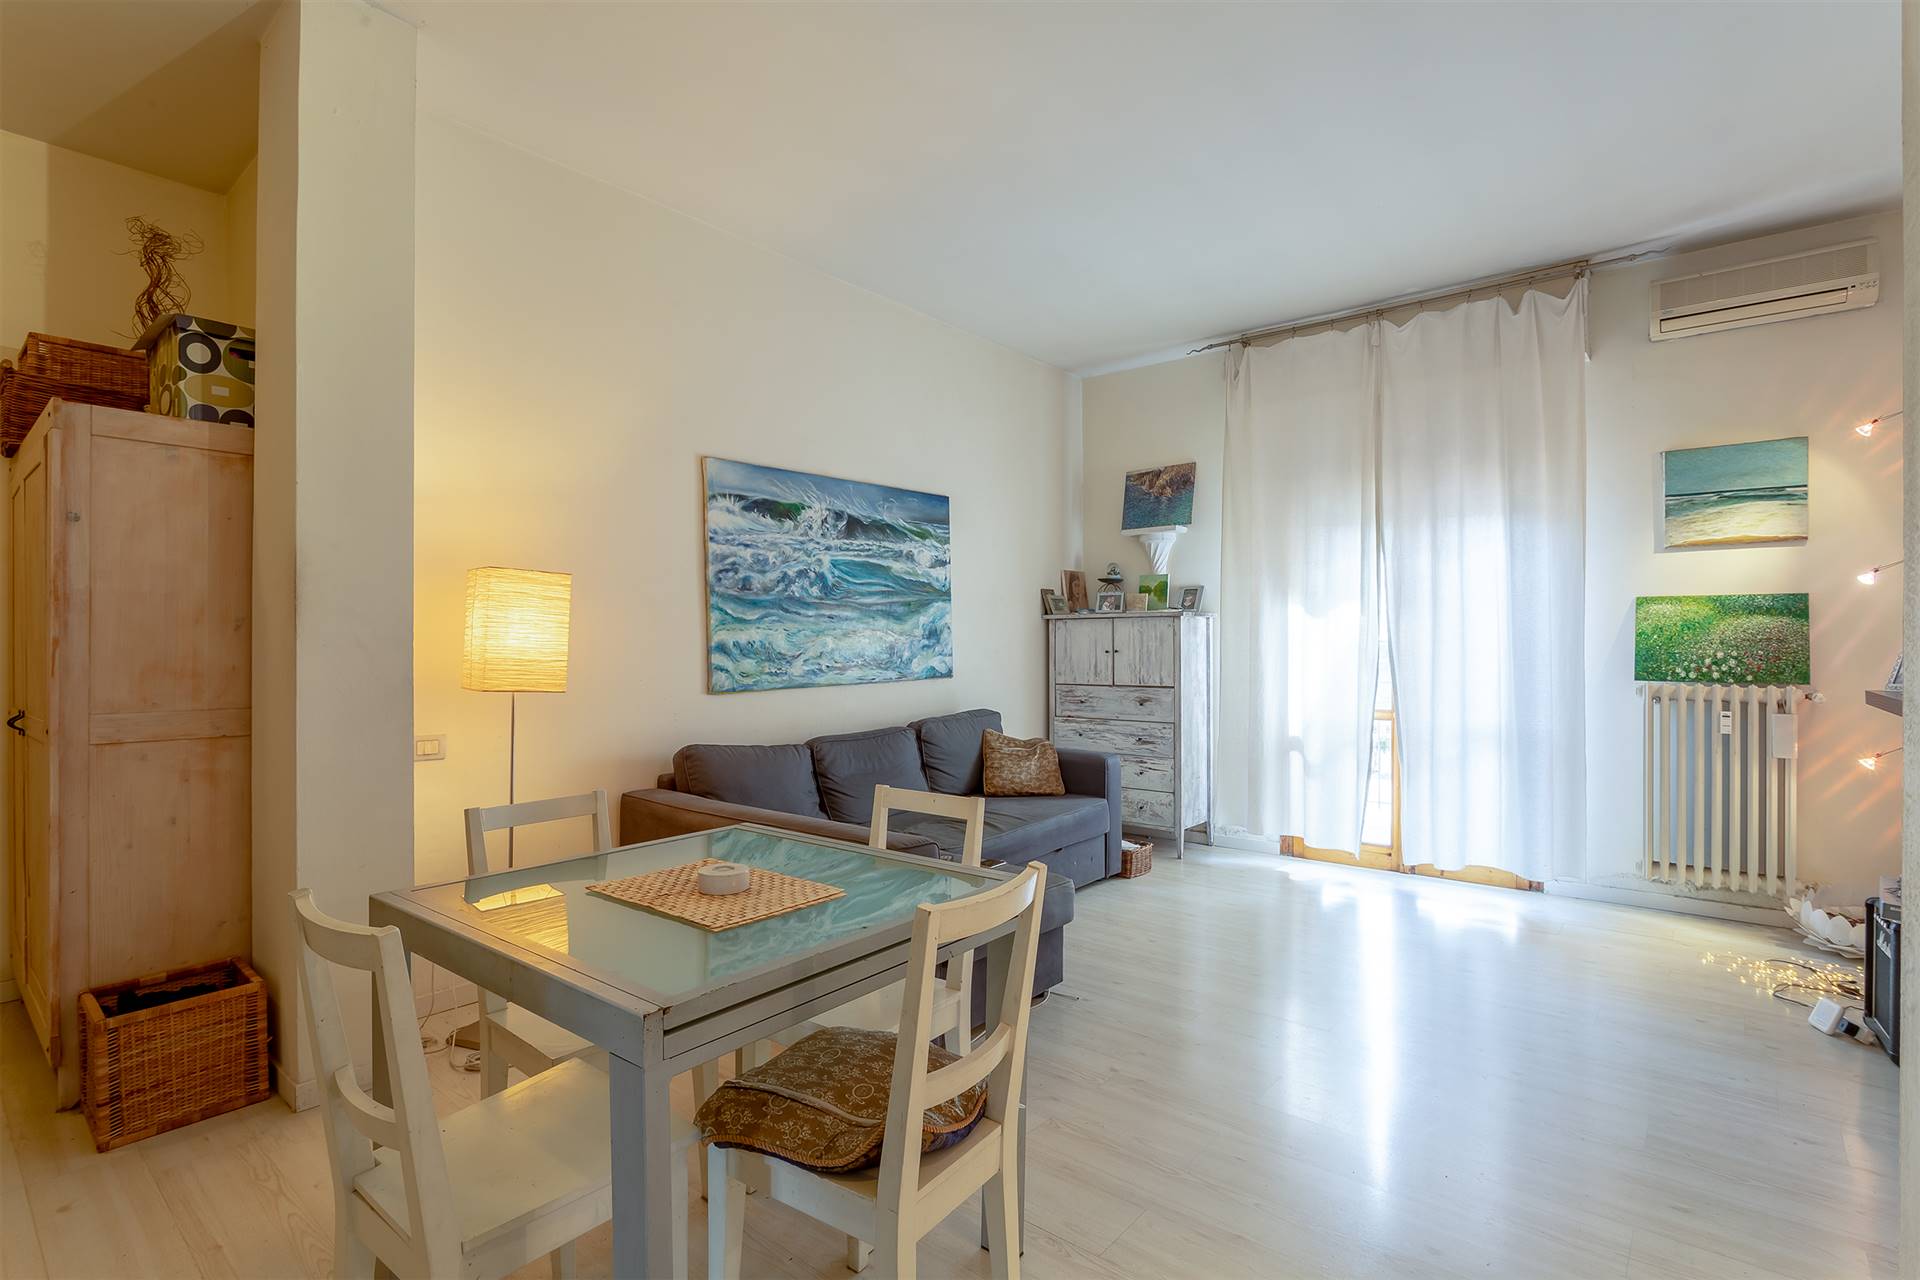 SAN PIERO A PONTI, CAMPI BISENZIO, Apartment for sale of 84 Sq. mt., Good condition, Heating Centralized, Energetic class: G, placed at 1° on 4, composed by: 4 Rooms, Separate kitchen, , 2 Bedrooms, 